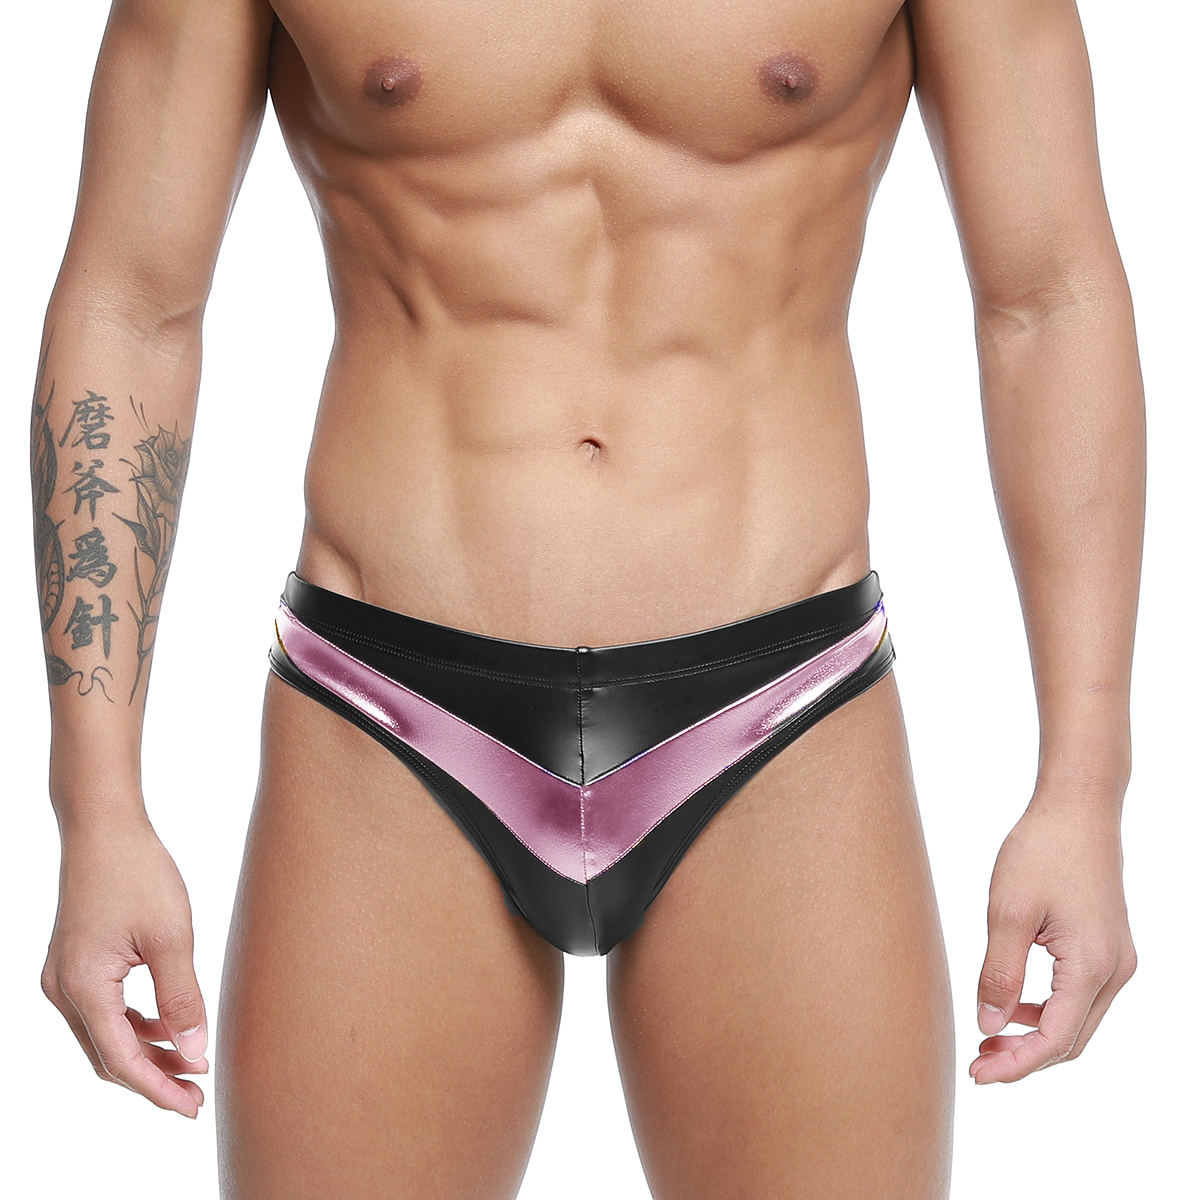 [MetroMuscleWear] Mark Competition Suit Pink (4974-91)